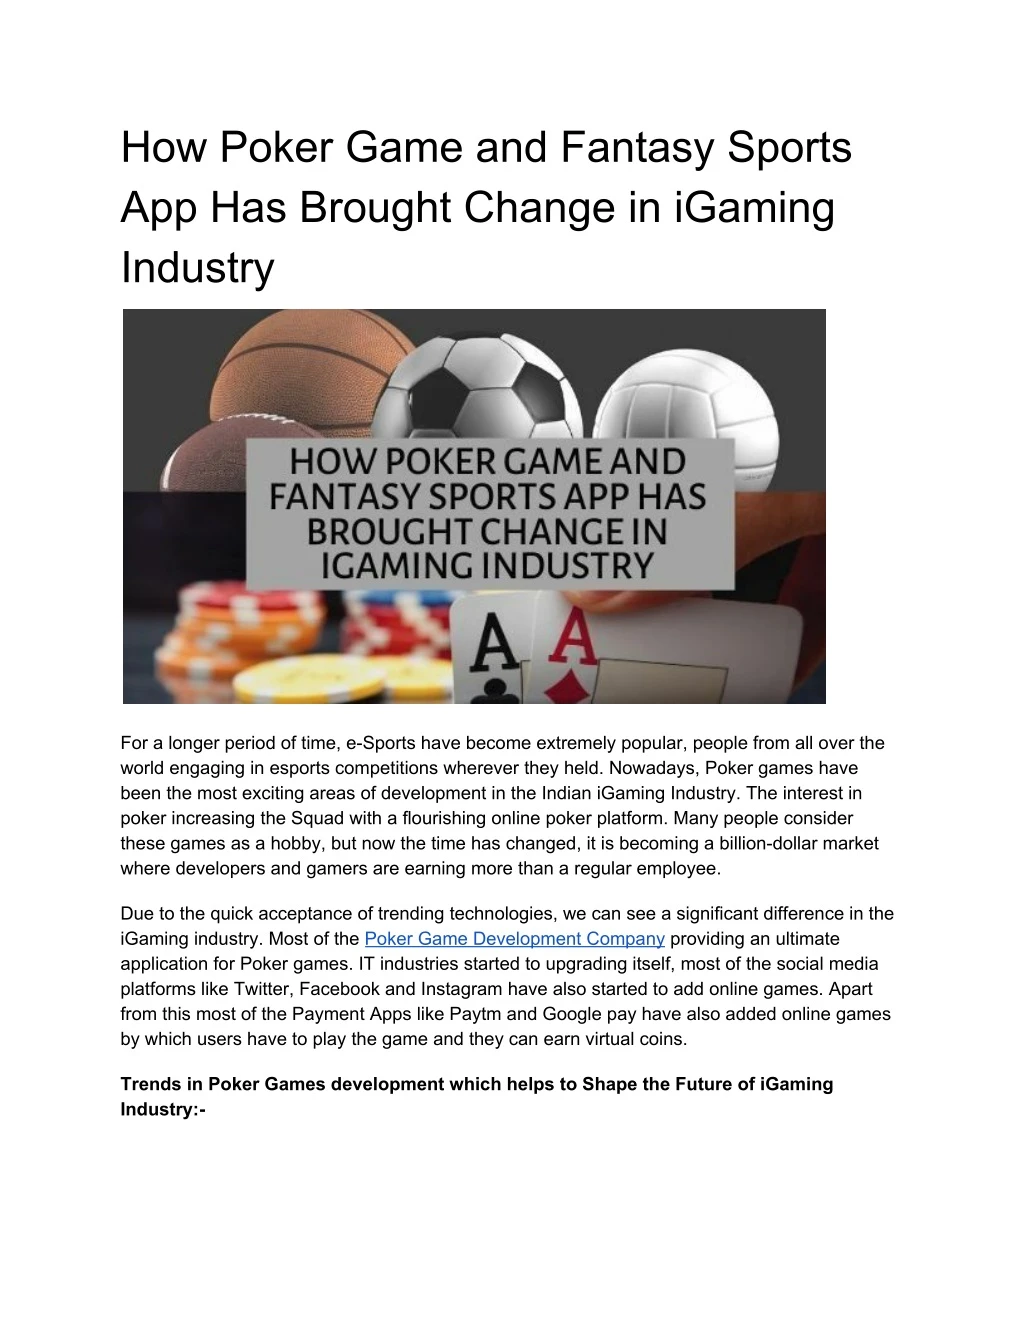 how poker game and fantasy sports app has brought